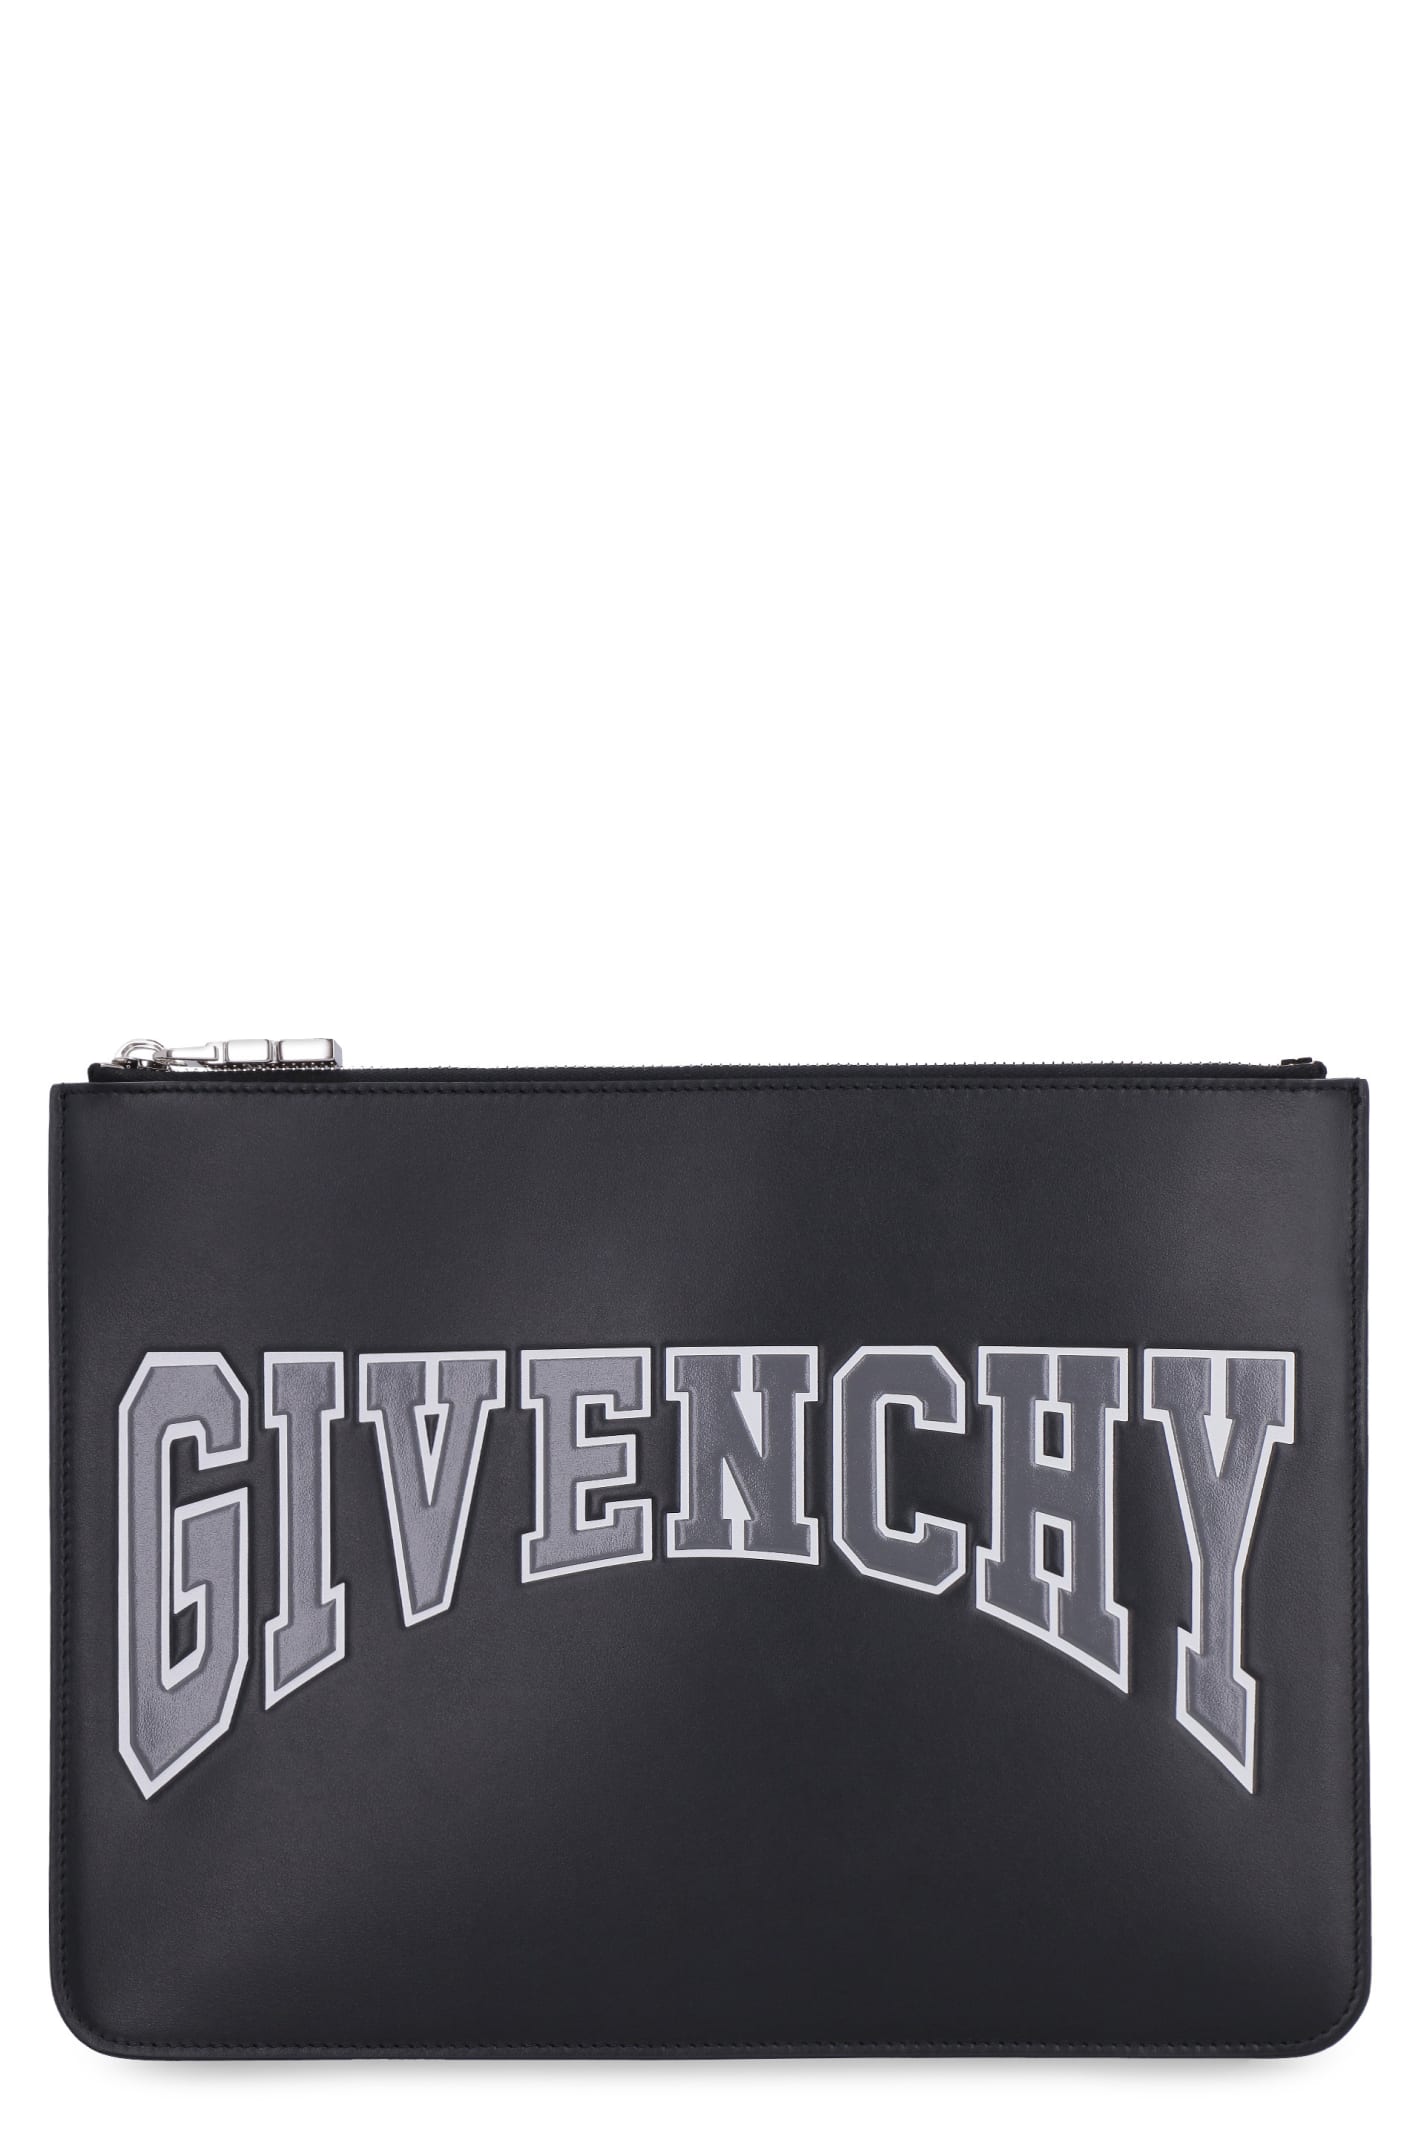 Givenchy Logo Detail Flat Leather Pouch